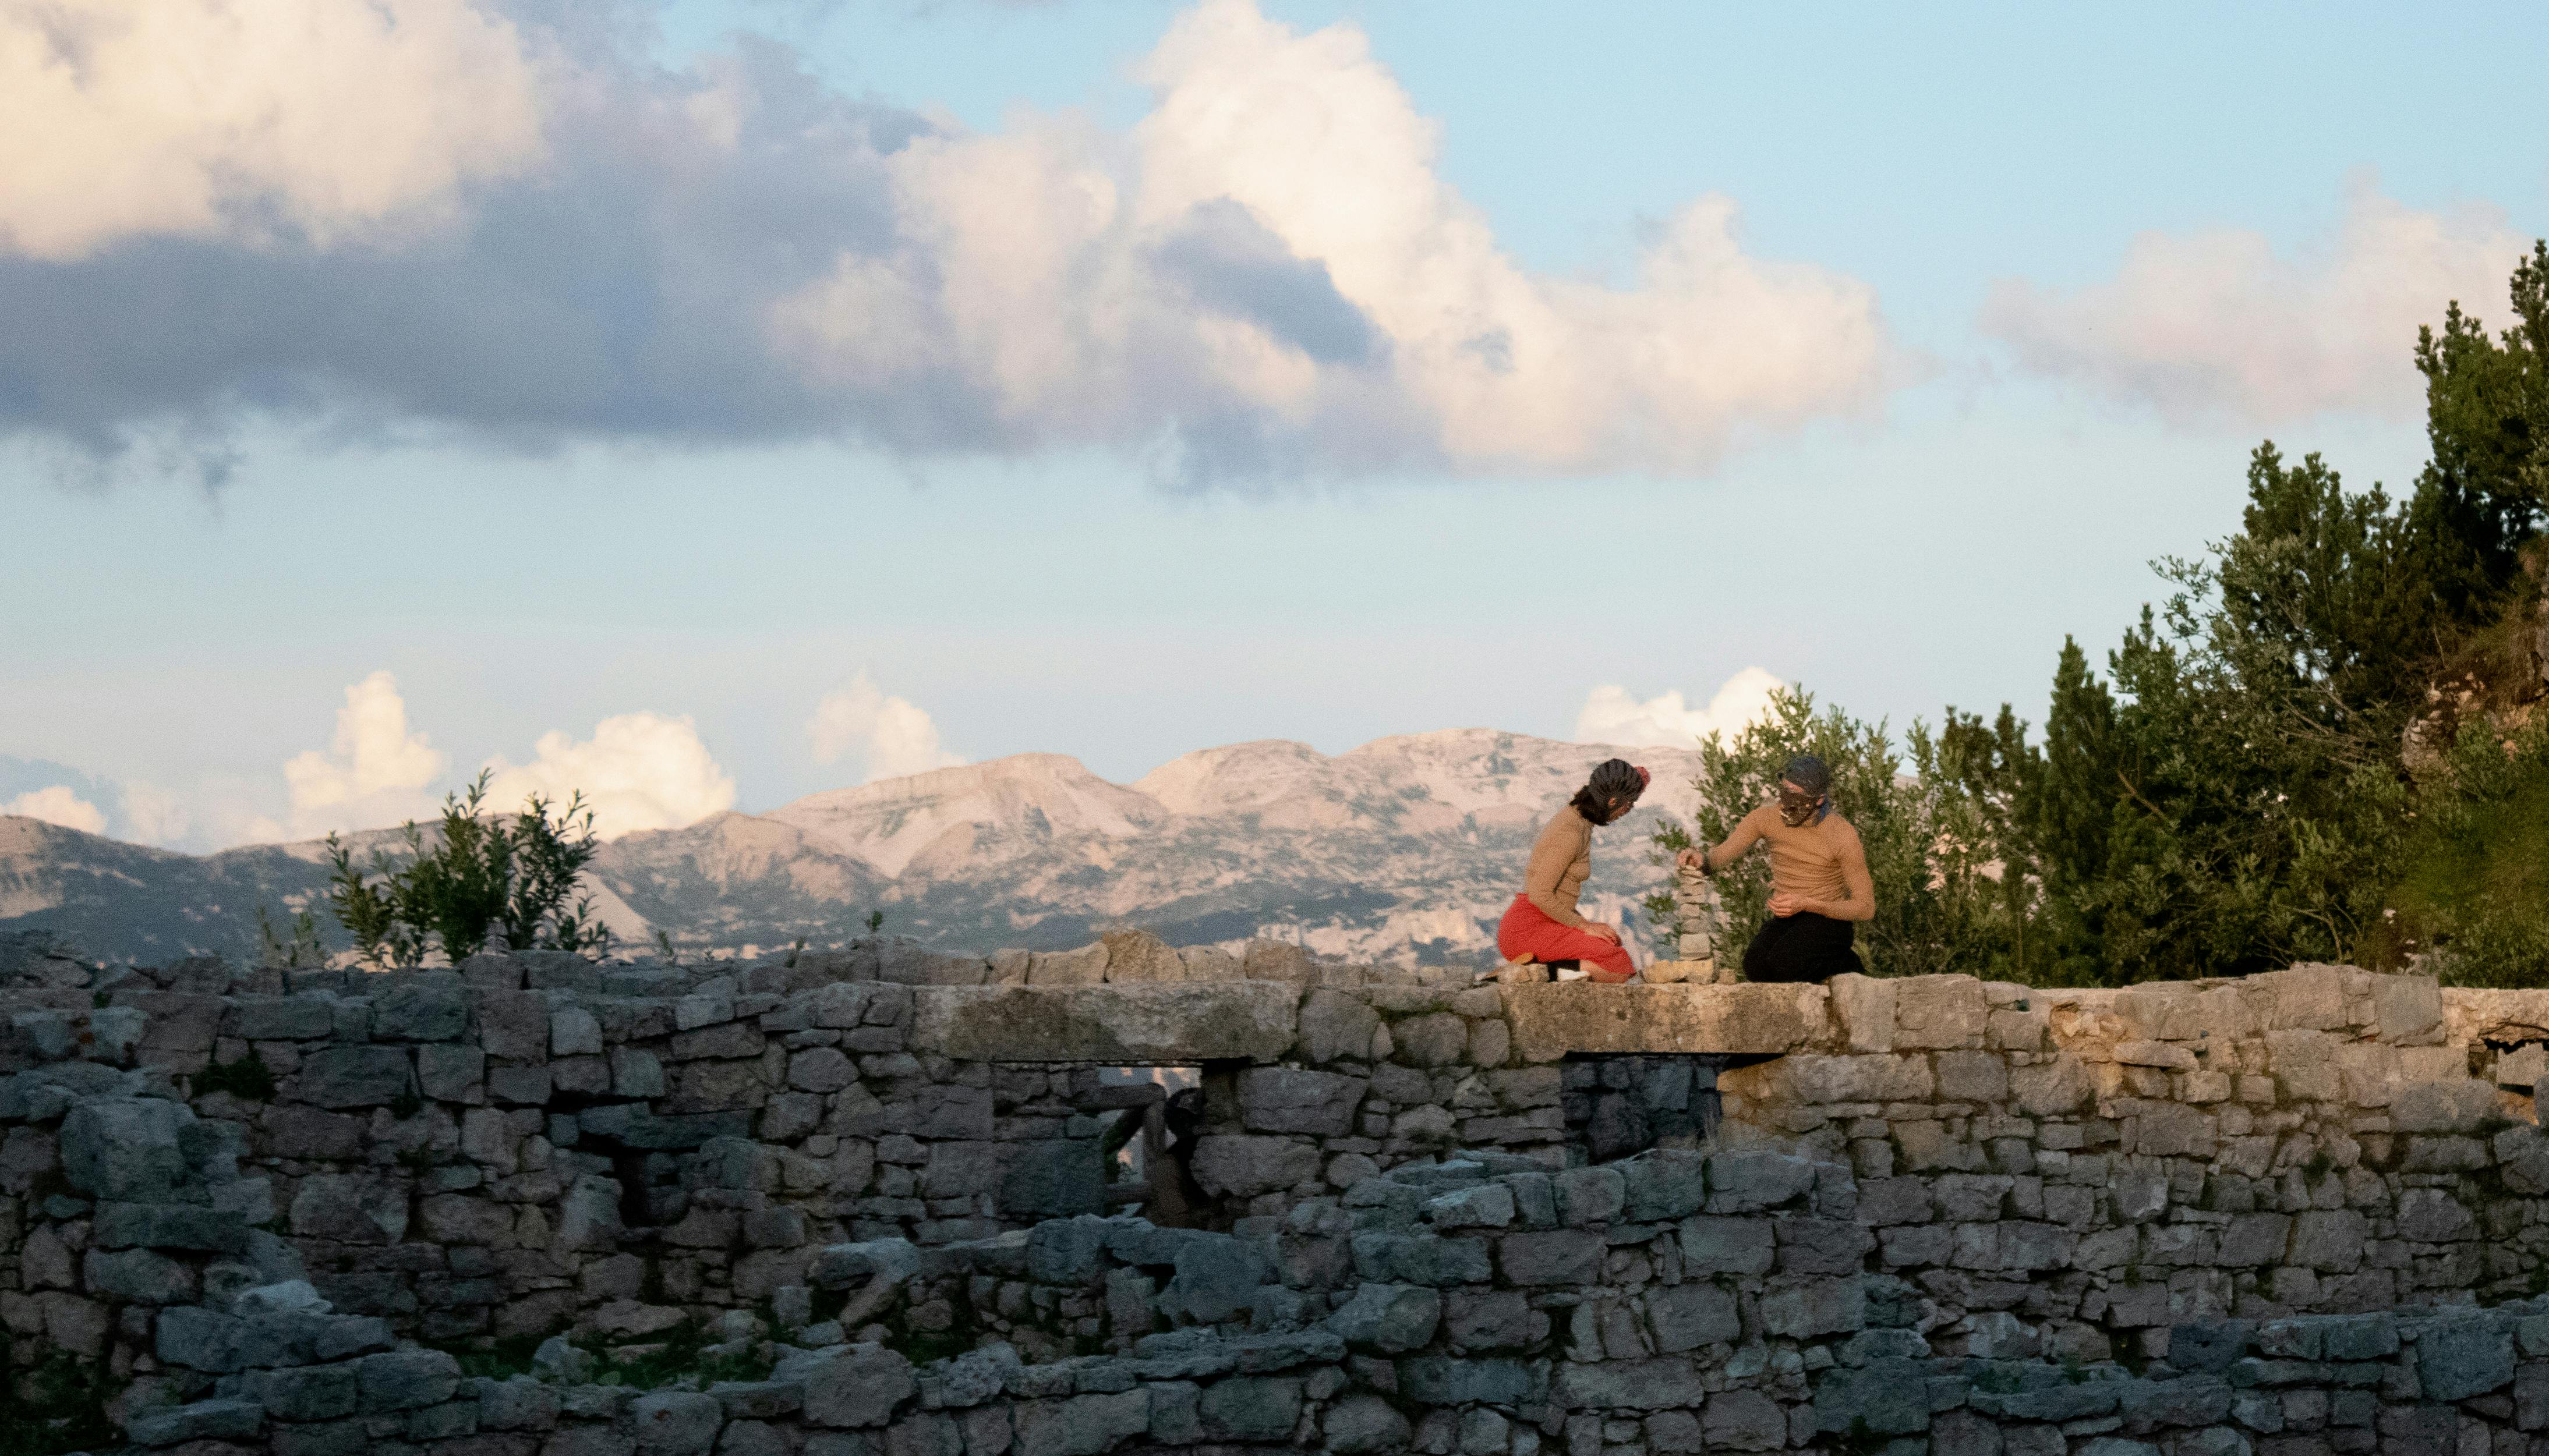 Two performers kneeled on a stone wall during the show Il mondo altrove. Behind them a landscape opens up: mountains and a clear sky.